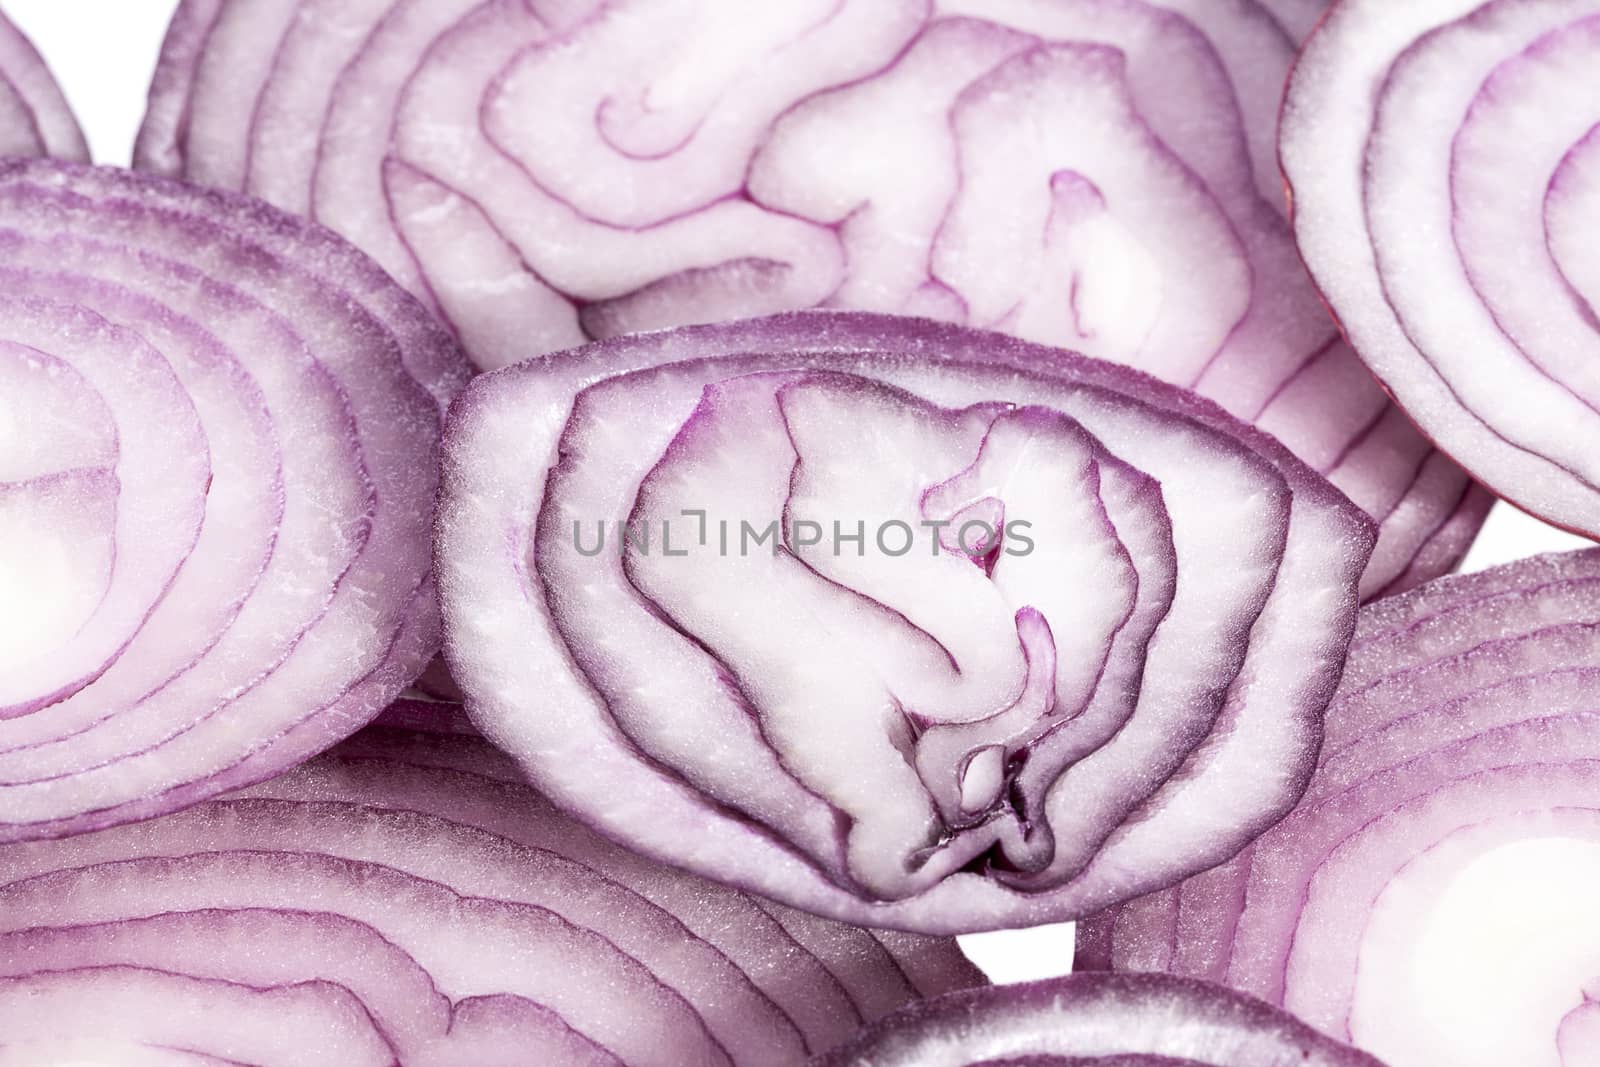 Slices of red onion on white background, close up by mychadre77